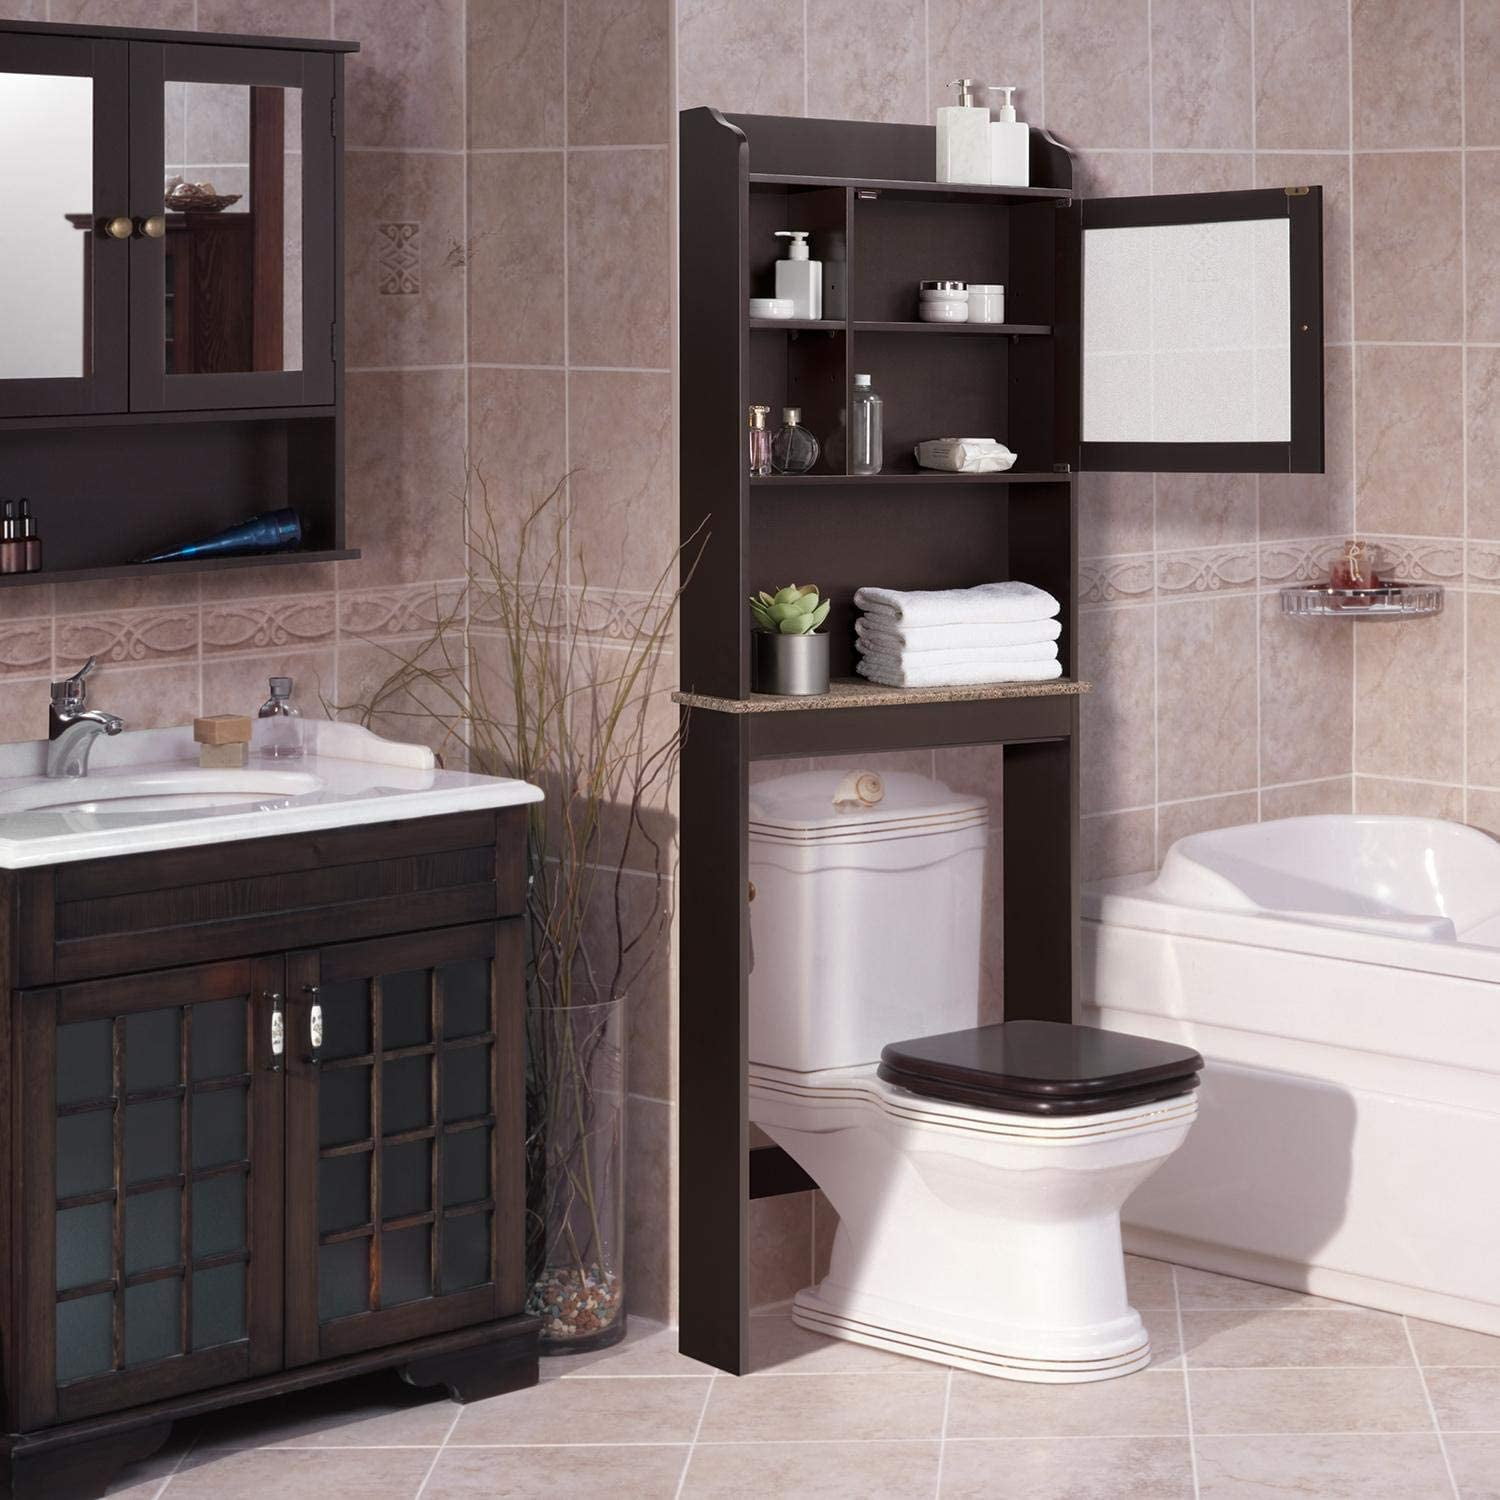 Bathroom Cabinets Over the Toilet and More Storage Ideas You'll Love